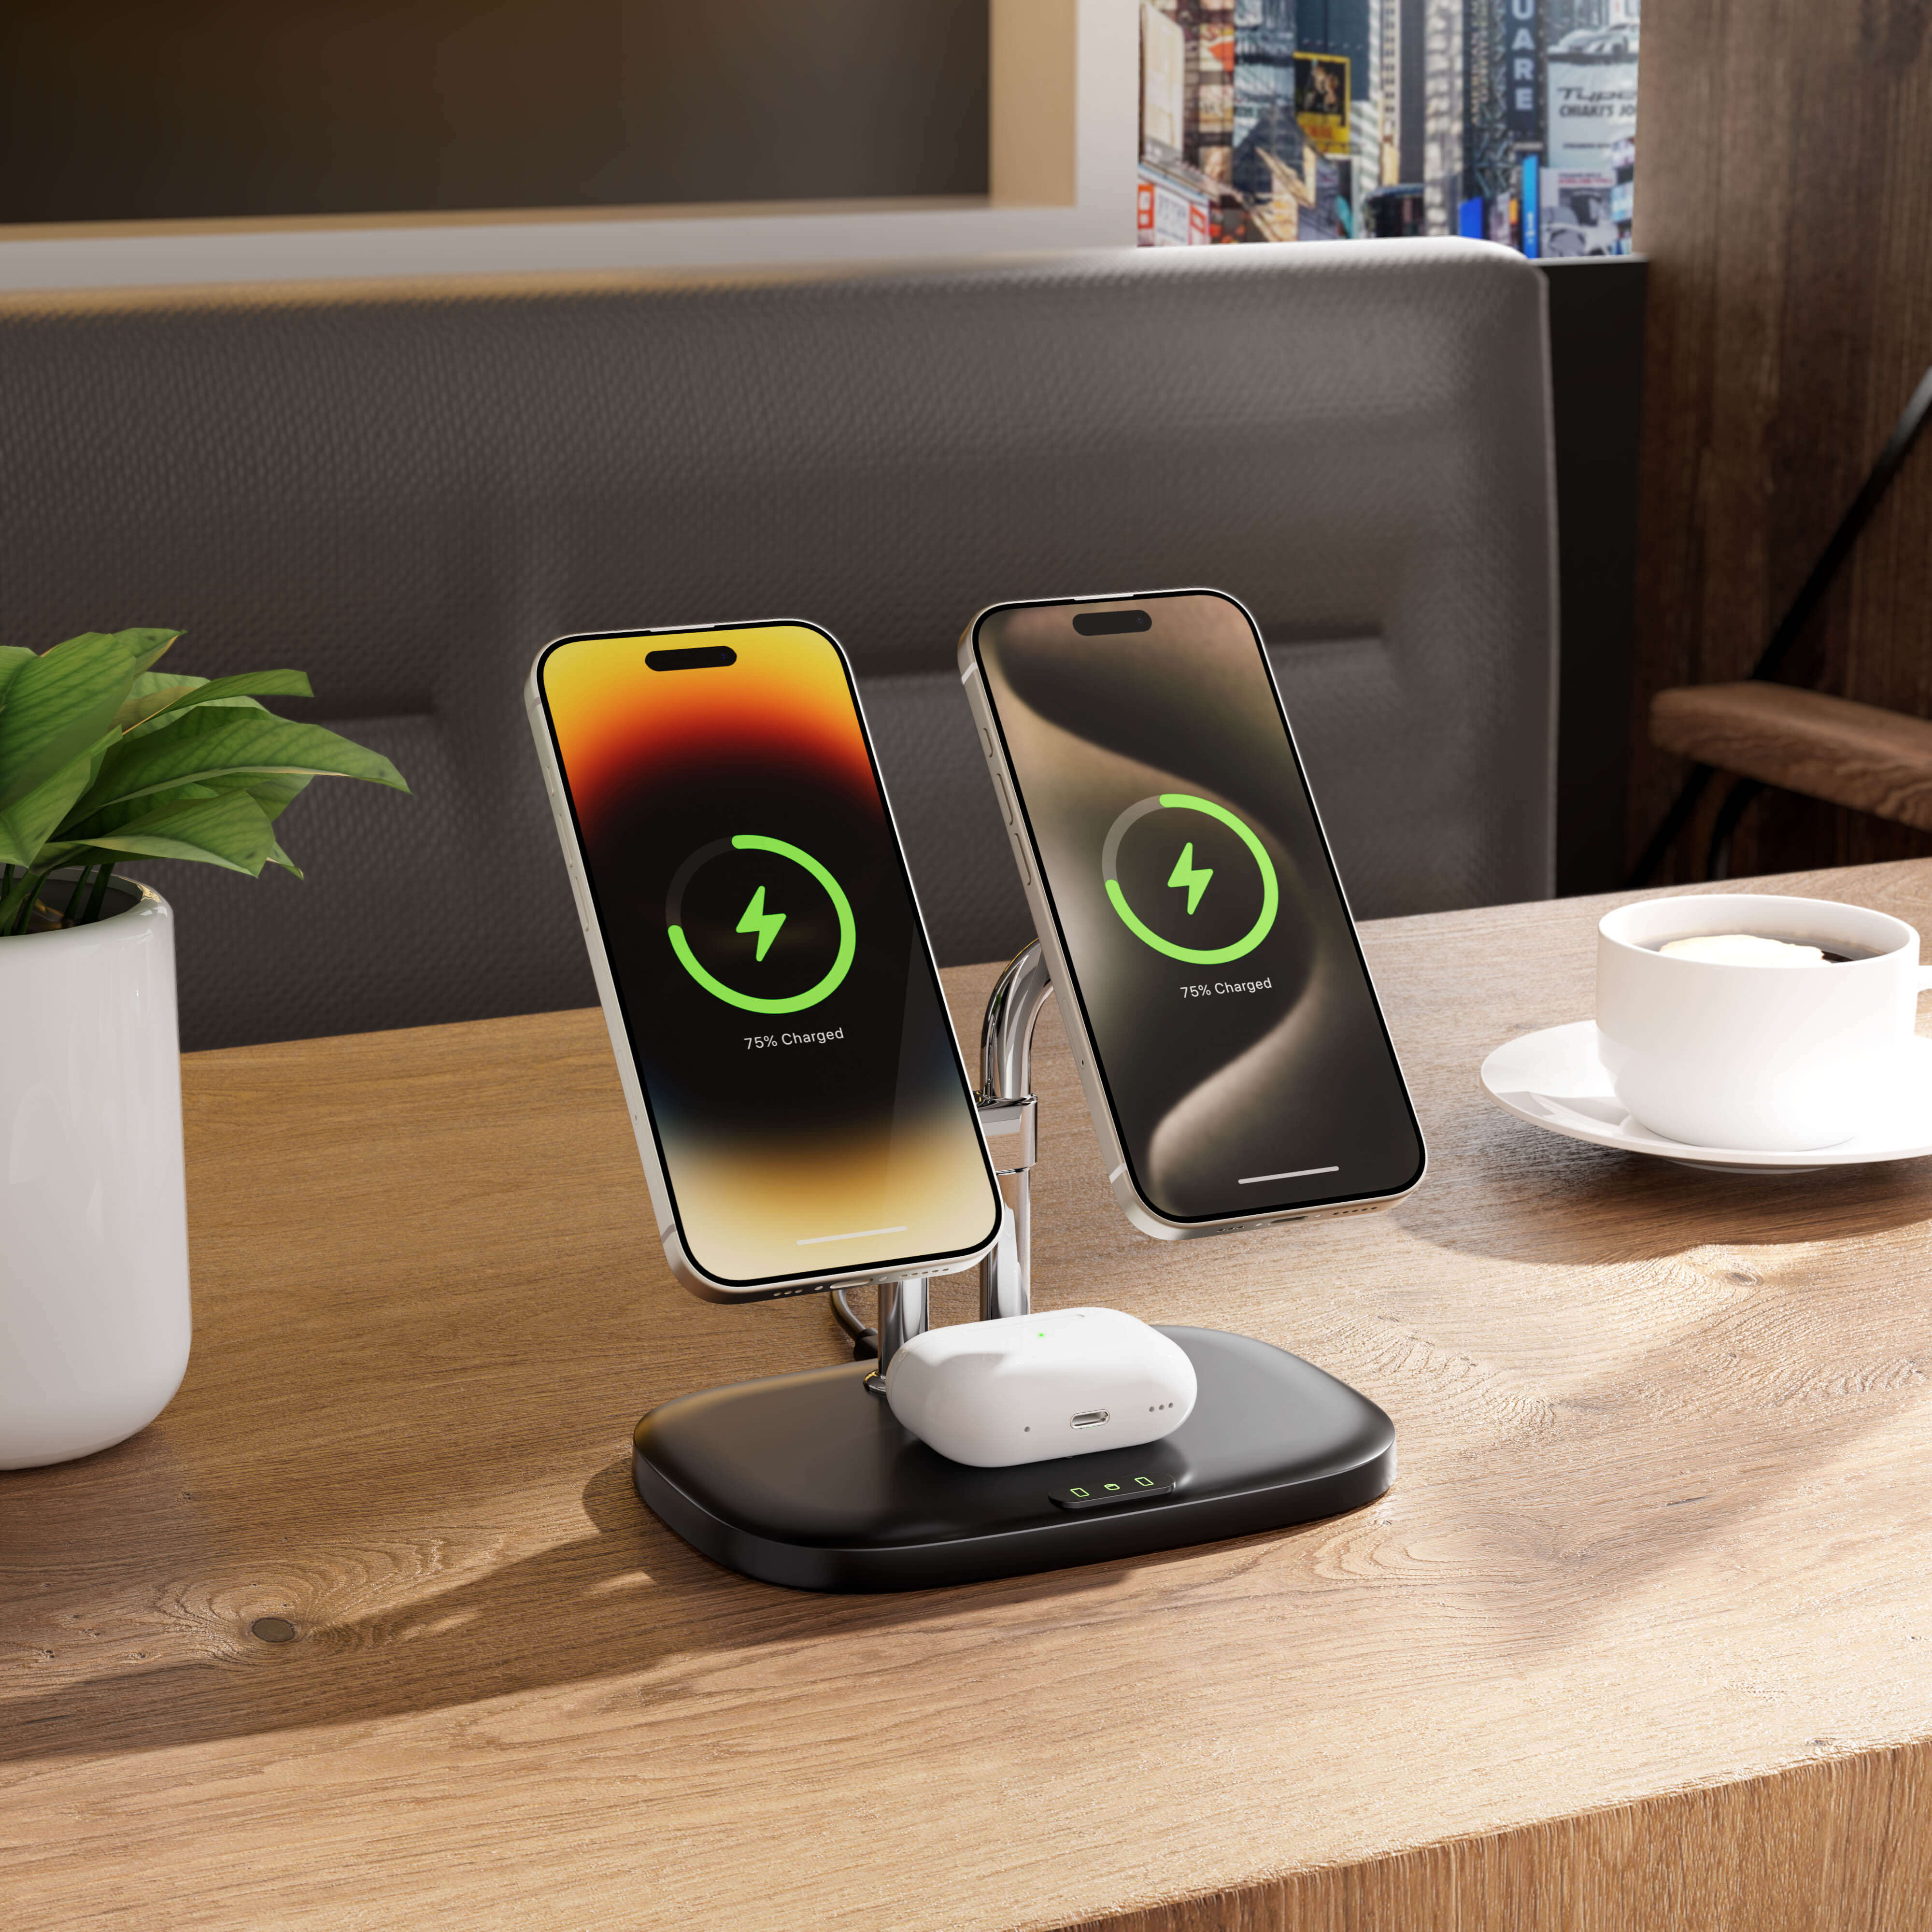 Introducing SwanScout 706M, a 3-in-1 Foldable Wireless Charging Station for Apple devices, designed for compatibility with multiple devices, featuring magnetic suction technology for improved charging efficiency. Its elegant design is sleek and sophisticated, while accurate charging indicators provide intuitive charging status.